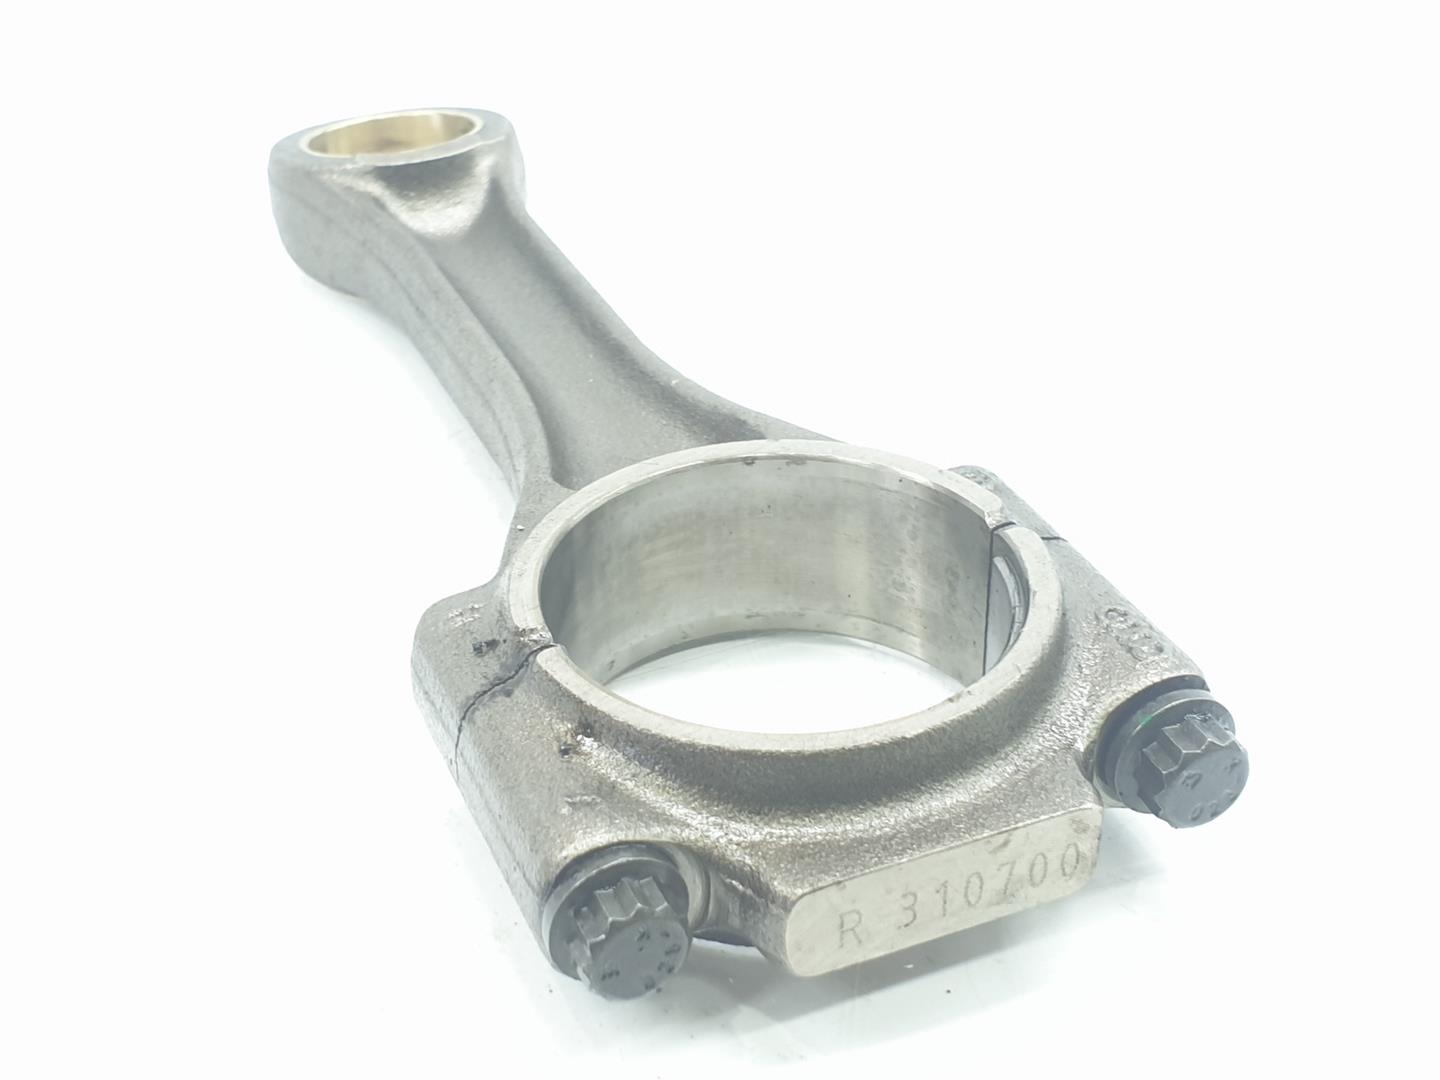 SEAT Ibiza 3 generation (2002-2008) Connecting Rod 045198401A, 045198401A, 1141CB 25100012